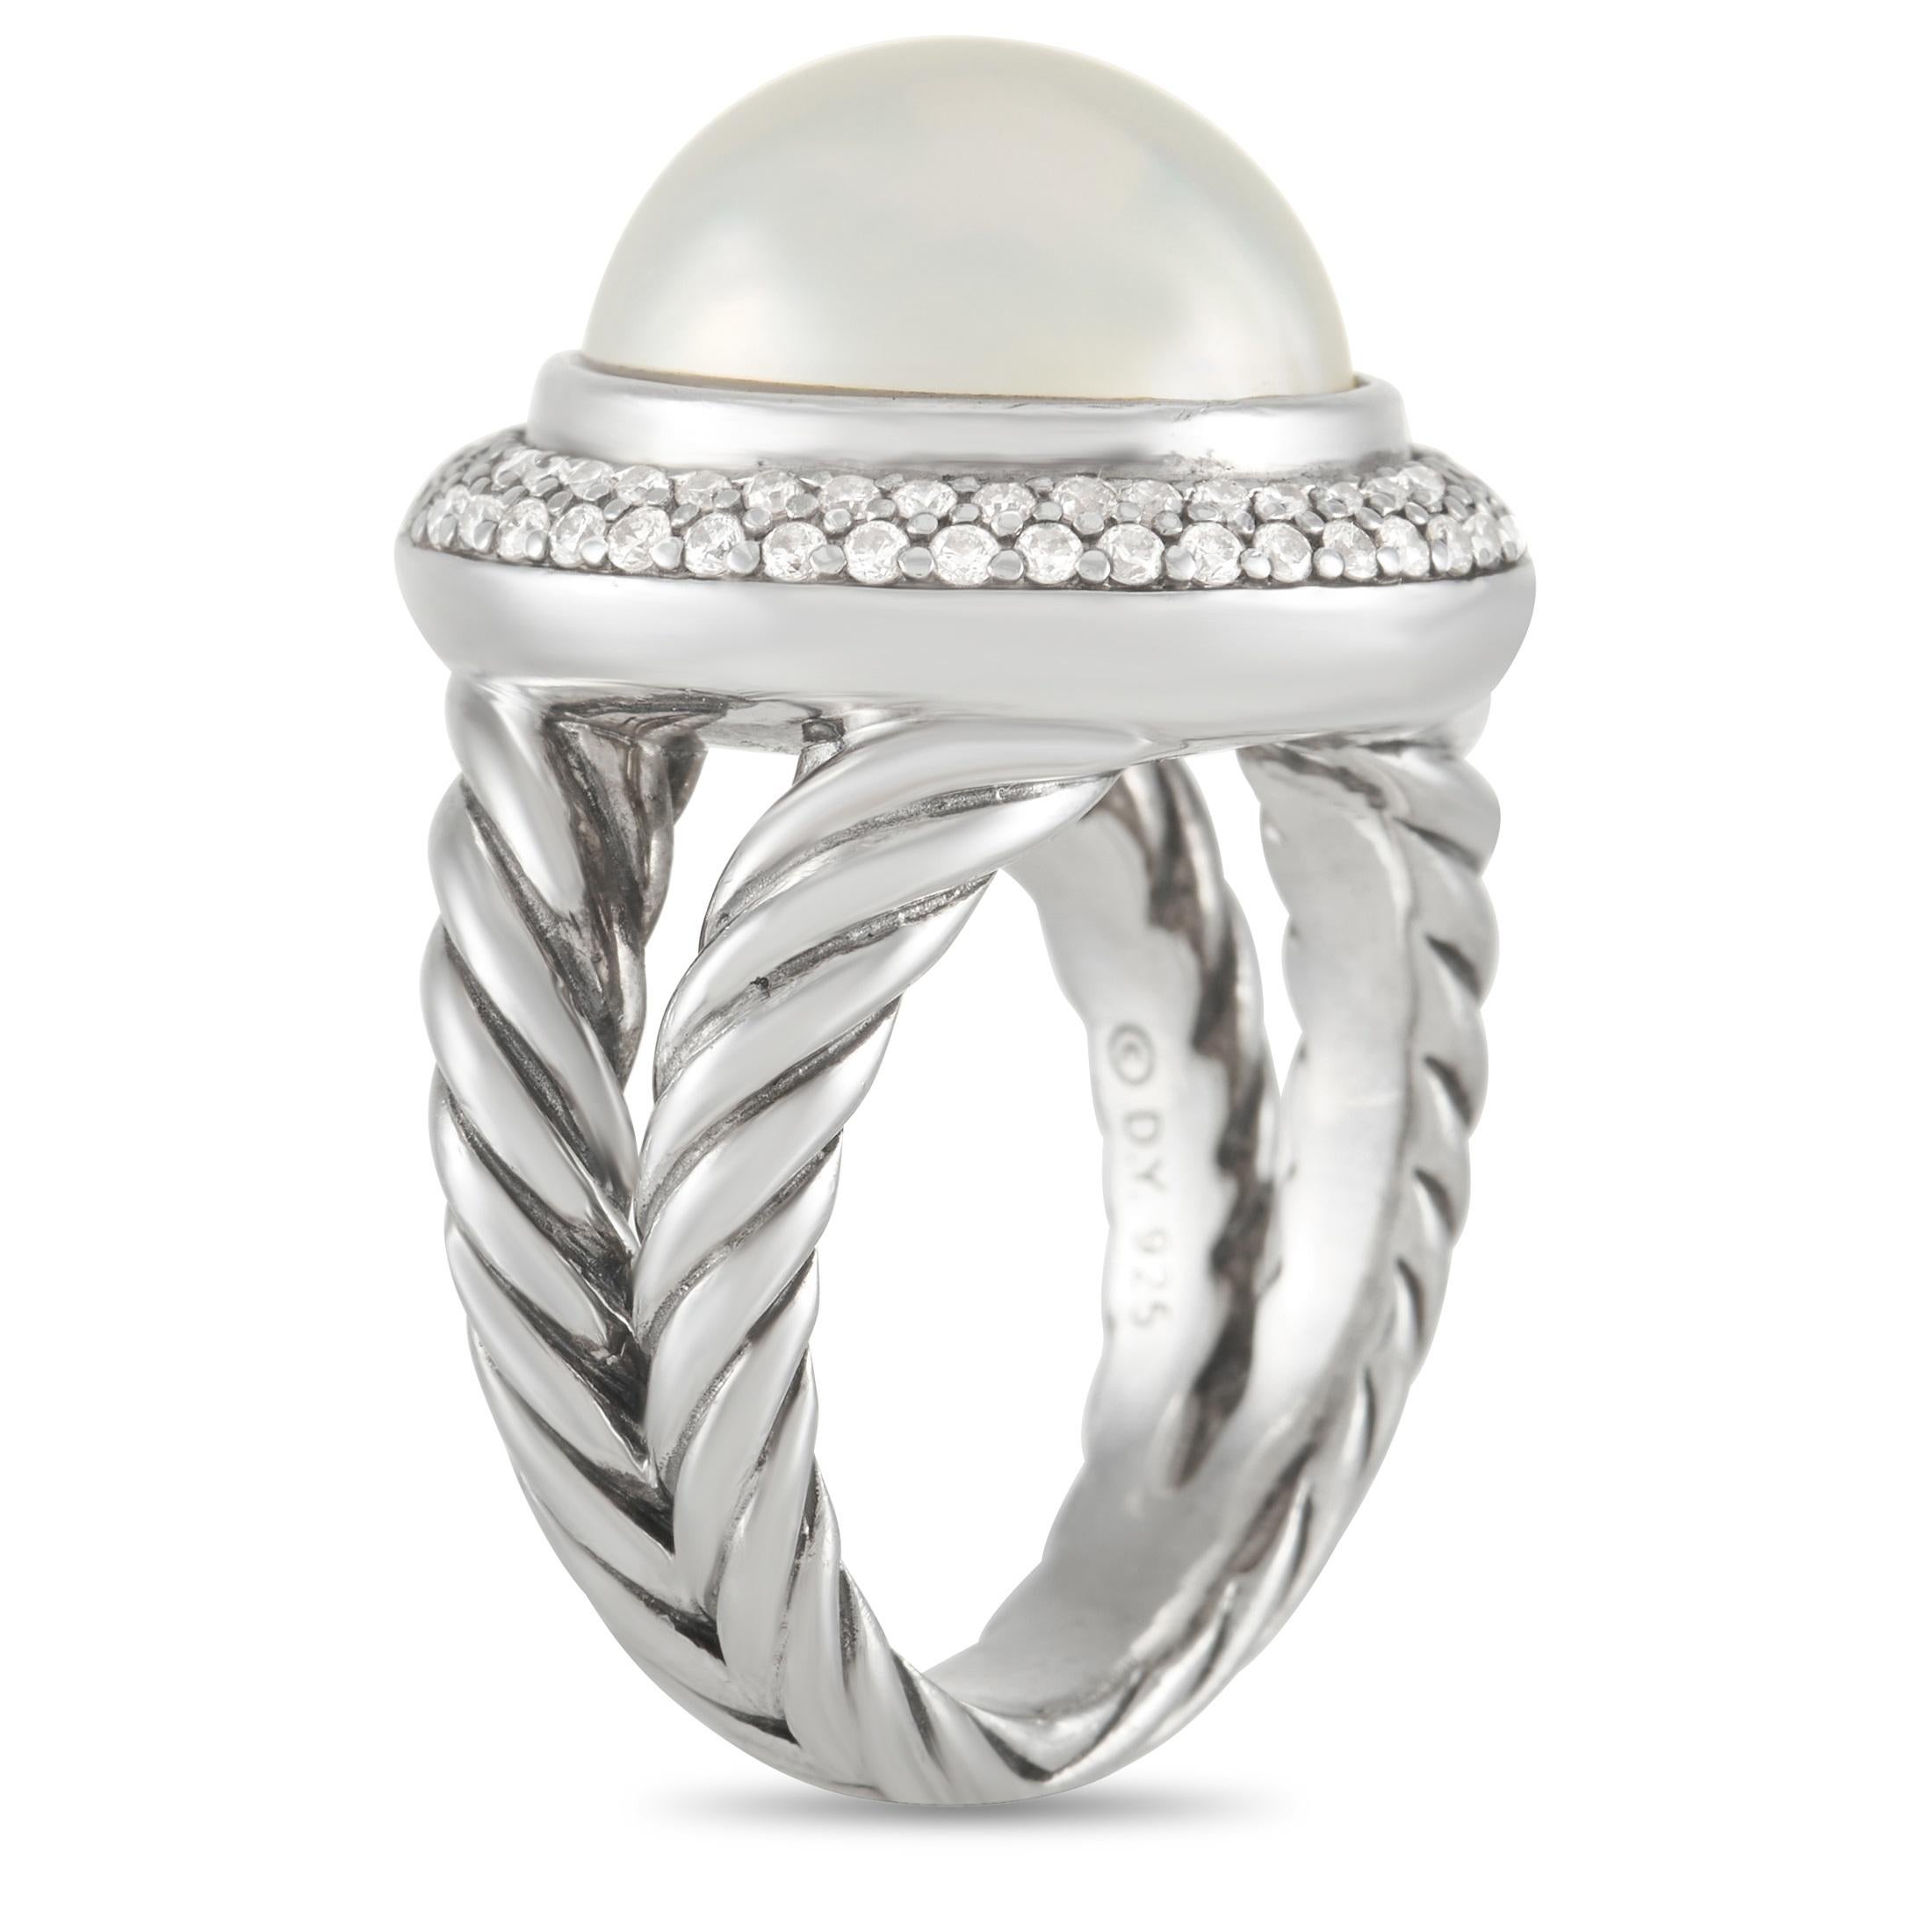 This estate ring from David Yurman is equal parts intricate and effortless. It begins with the opulent silver setting, which features a beautifully twisted band measuring 7mm wide. A large Mobee Pearl surrounded by an array of inset diamonds gives